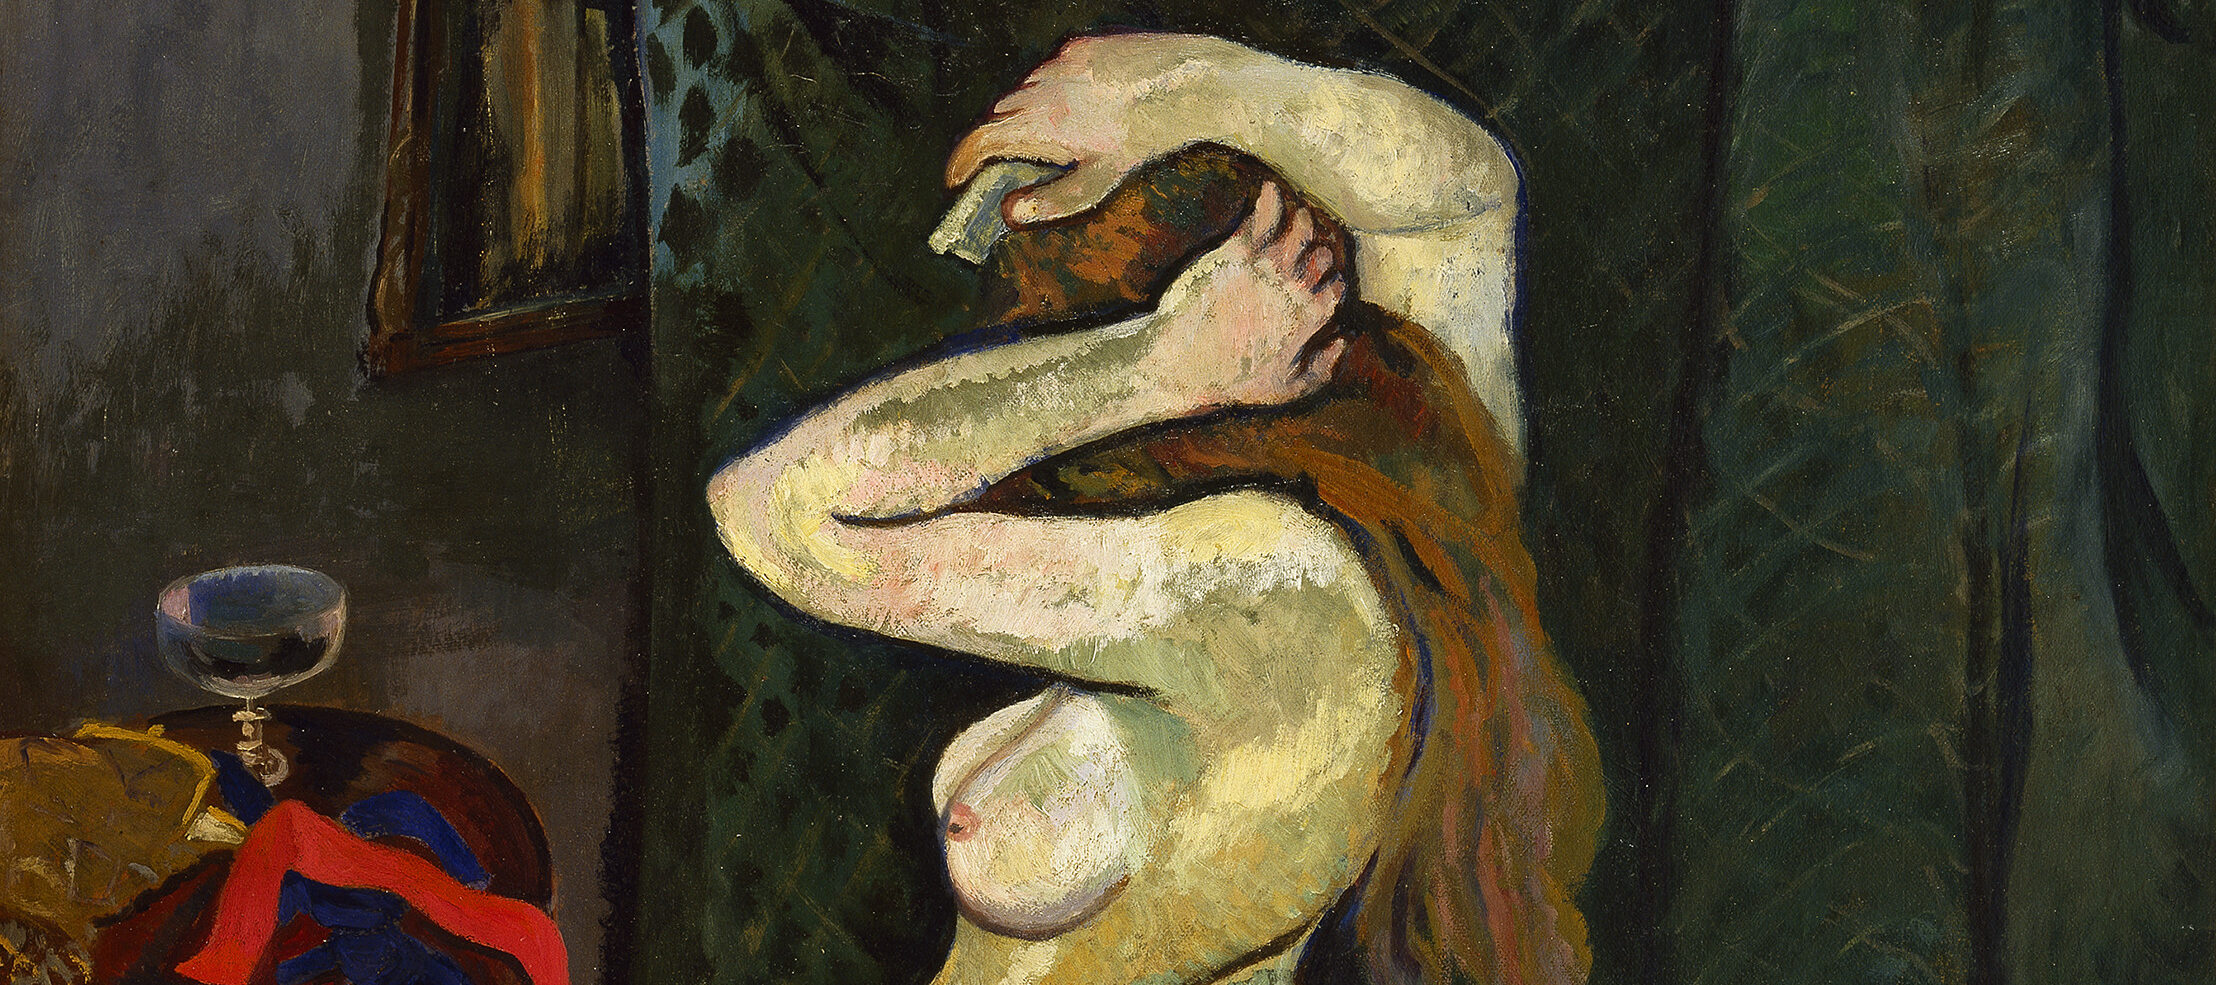 A nude woman stands in profile against dark green drapery. She turns her head away from the viewer while brushing her long, reddish-brown hair. Her light skin is streaked by unblended brushstrokes of green and orange; her figure and other shapes are delineated by dark outlines.